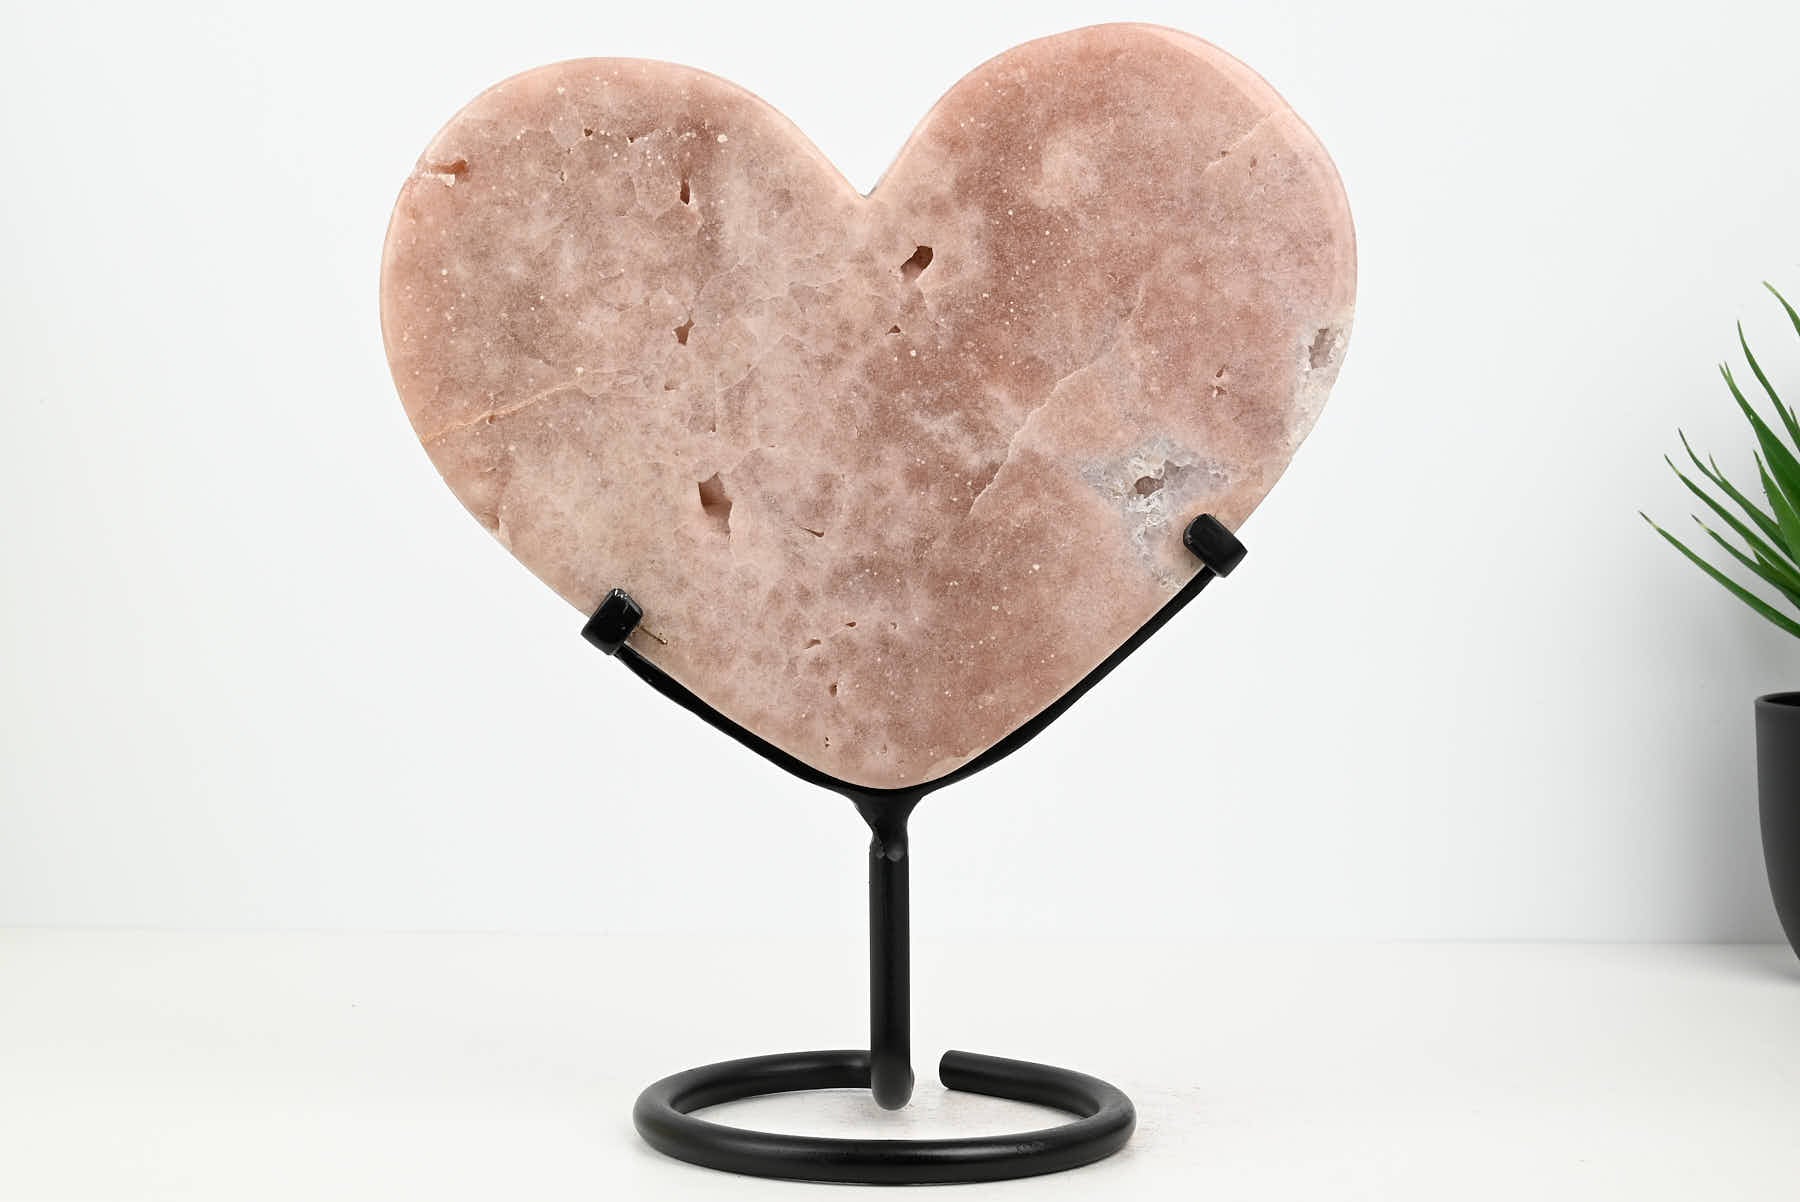 Extra Quality Pink Amethyst Heart - 2.87kg, 25cm high - #HTPINK-34024